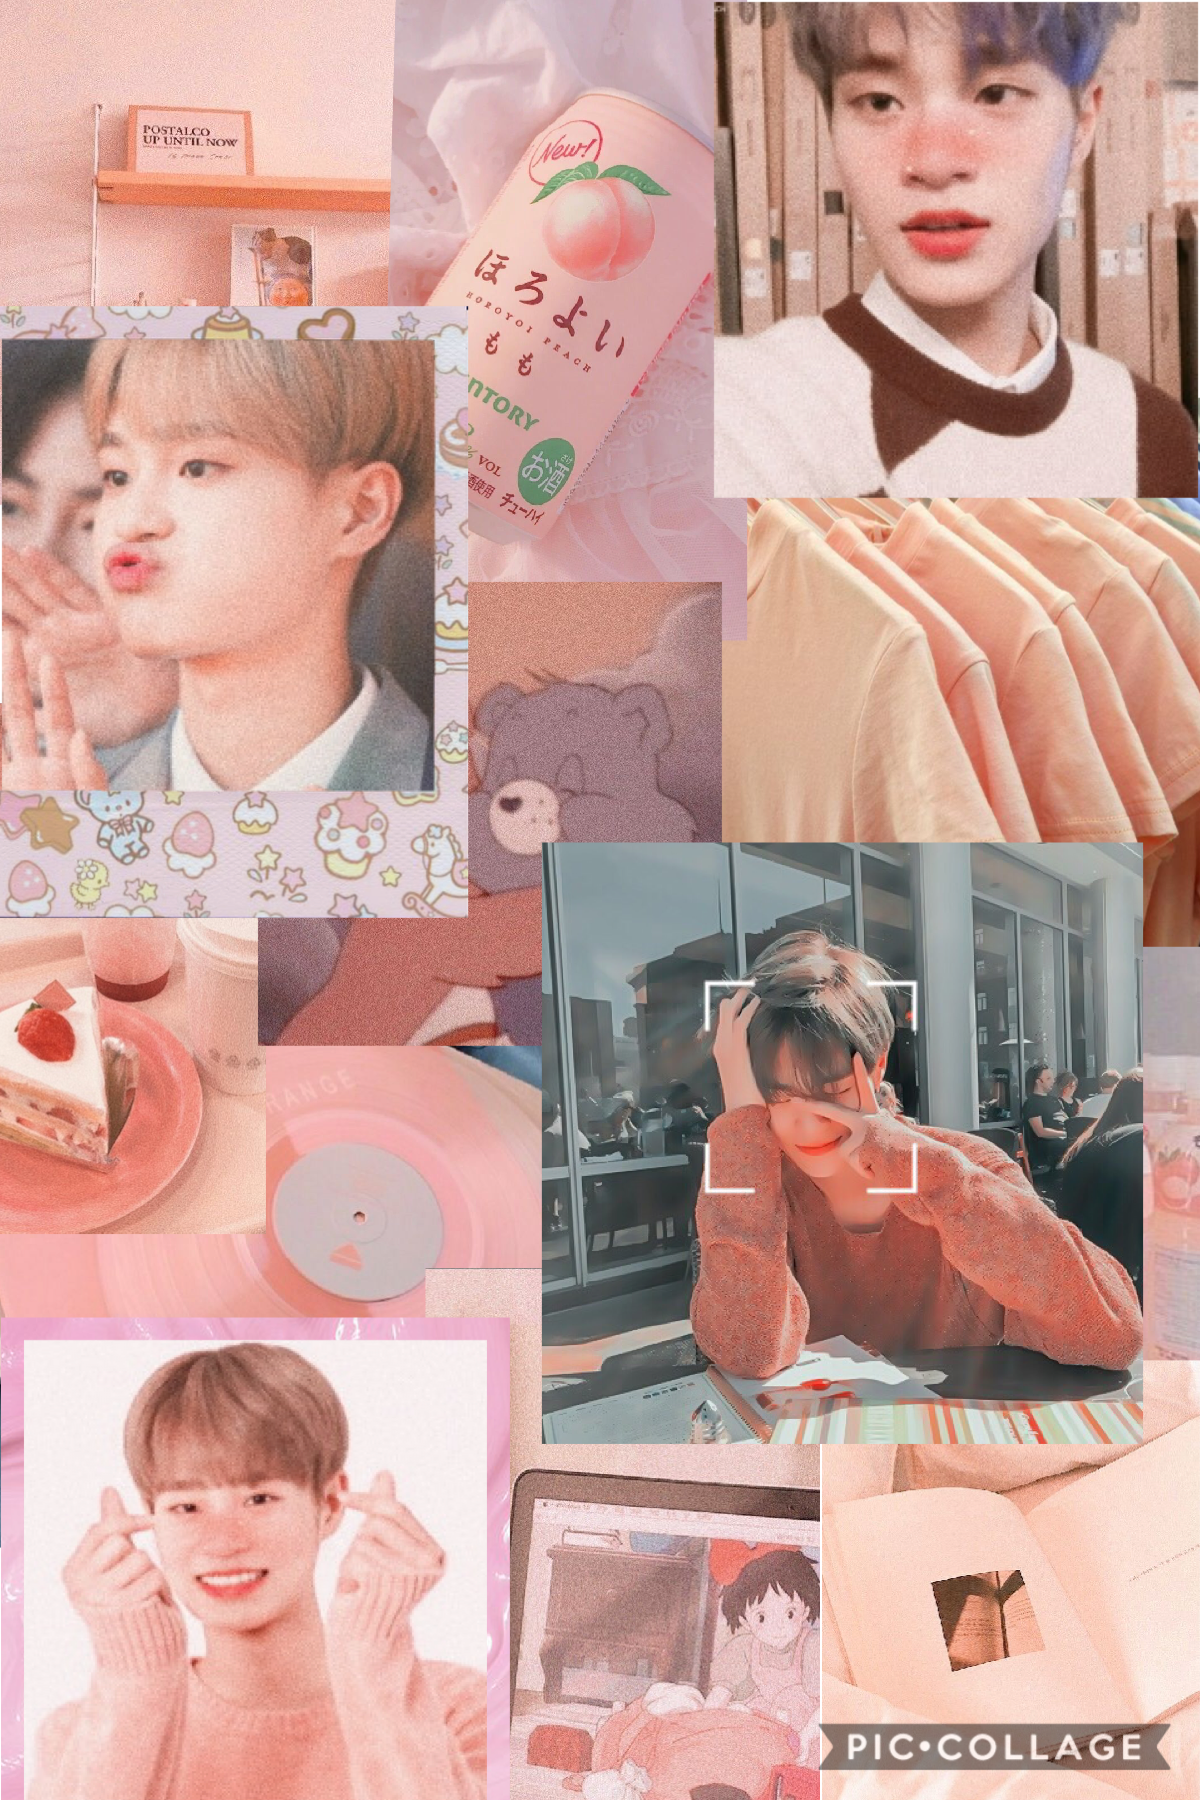 welcome to daehwi's cafe, open up 🍵

☆*:.｡. lee daehwi .｡.:*☆

i'm so proud of this uwu the colour scheme is so pretty 
hwi, our sweet baby in a painful world
ab6ix deserves more recognition so go stream now

song of the day: 00s cover of red velvet's psy